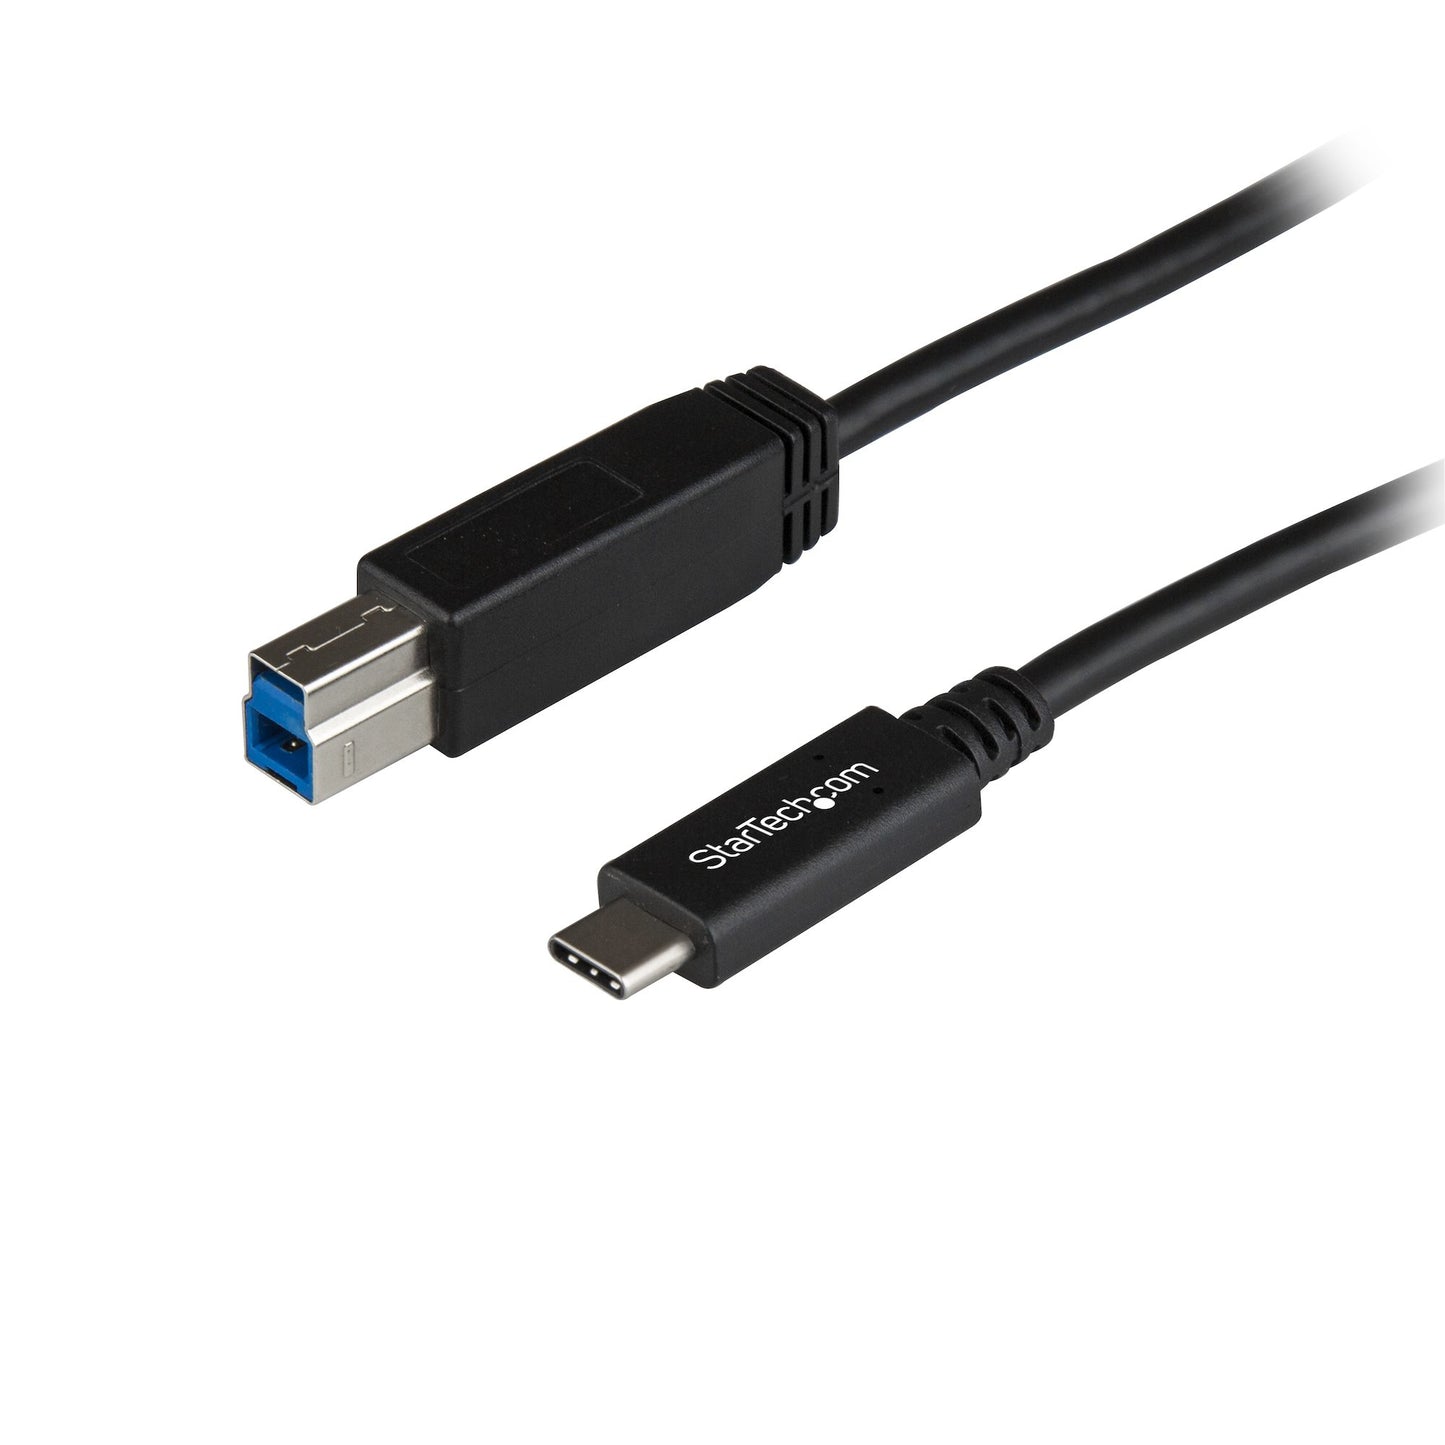 CABLE USB 3.0 1M USB-C USB B CABL USB TYPE-C - X-CUSTOMER NOT AUTHORIZED for IPN/VPN Number: A8401NH